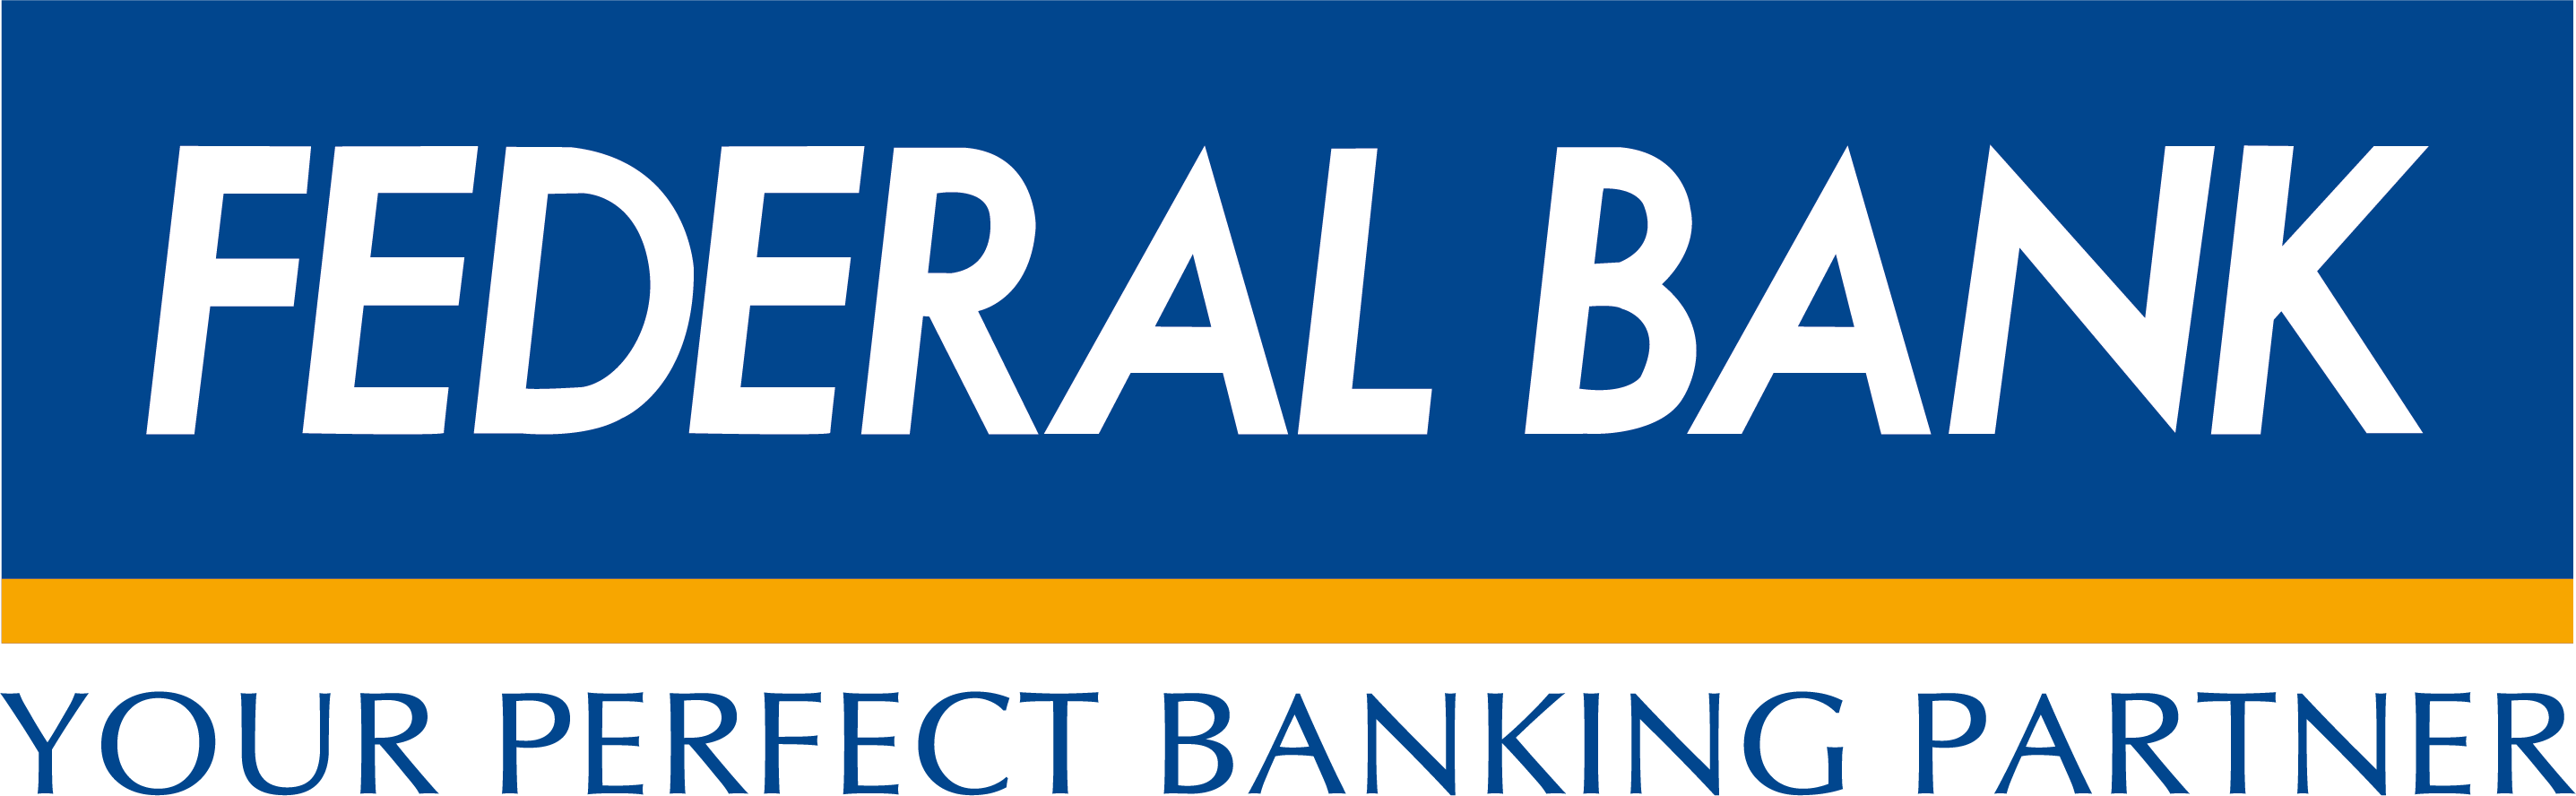 personal banking services | nri, business, & online banking | federal bank